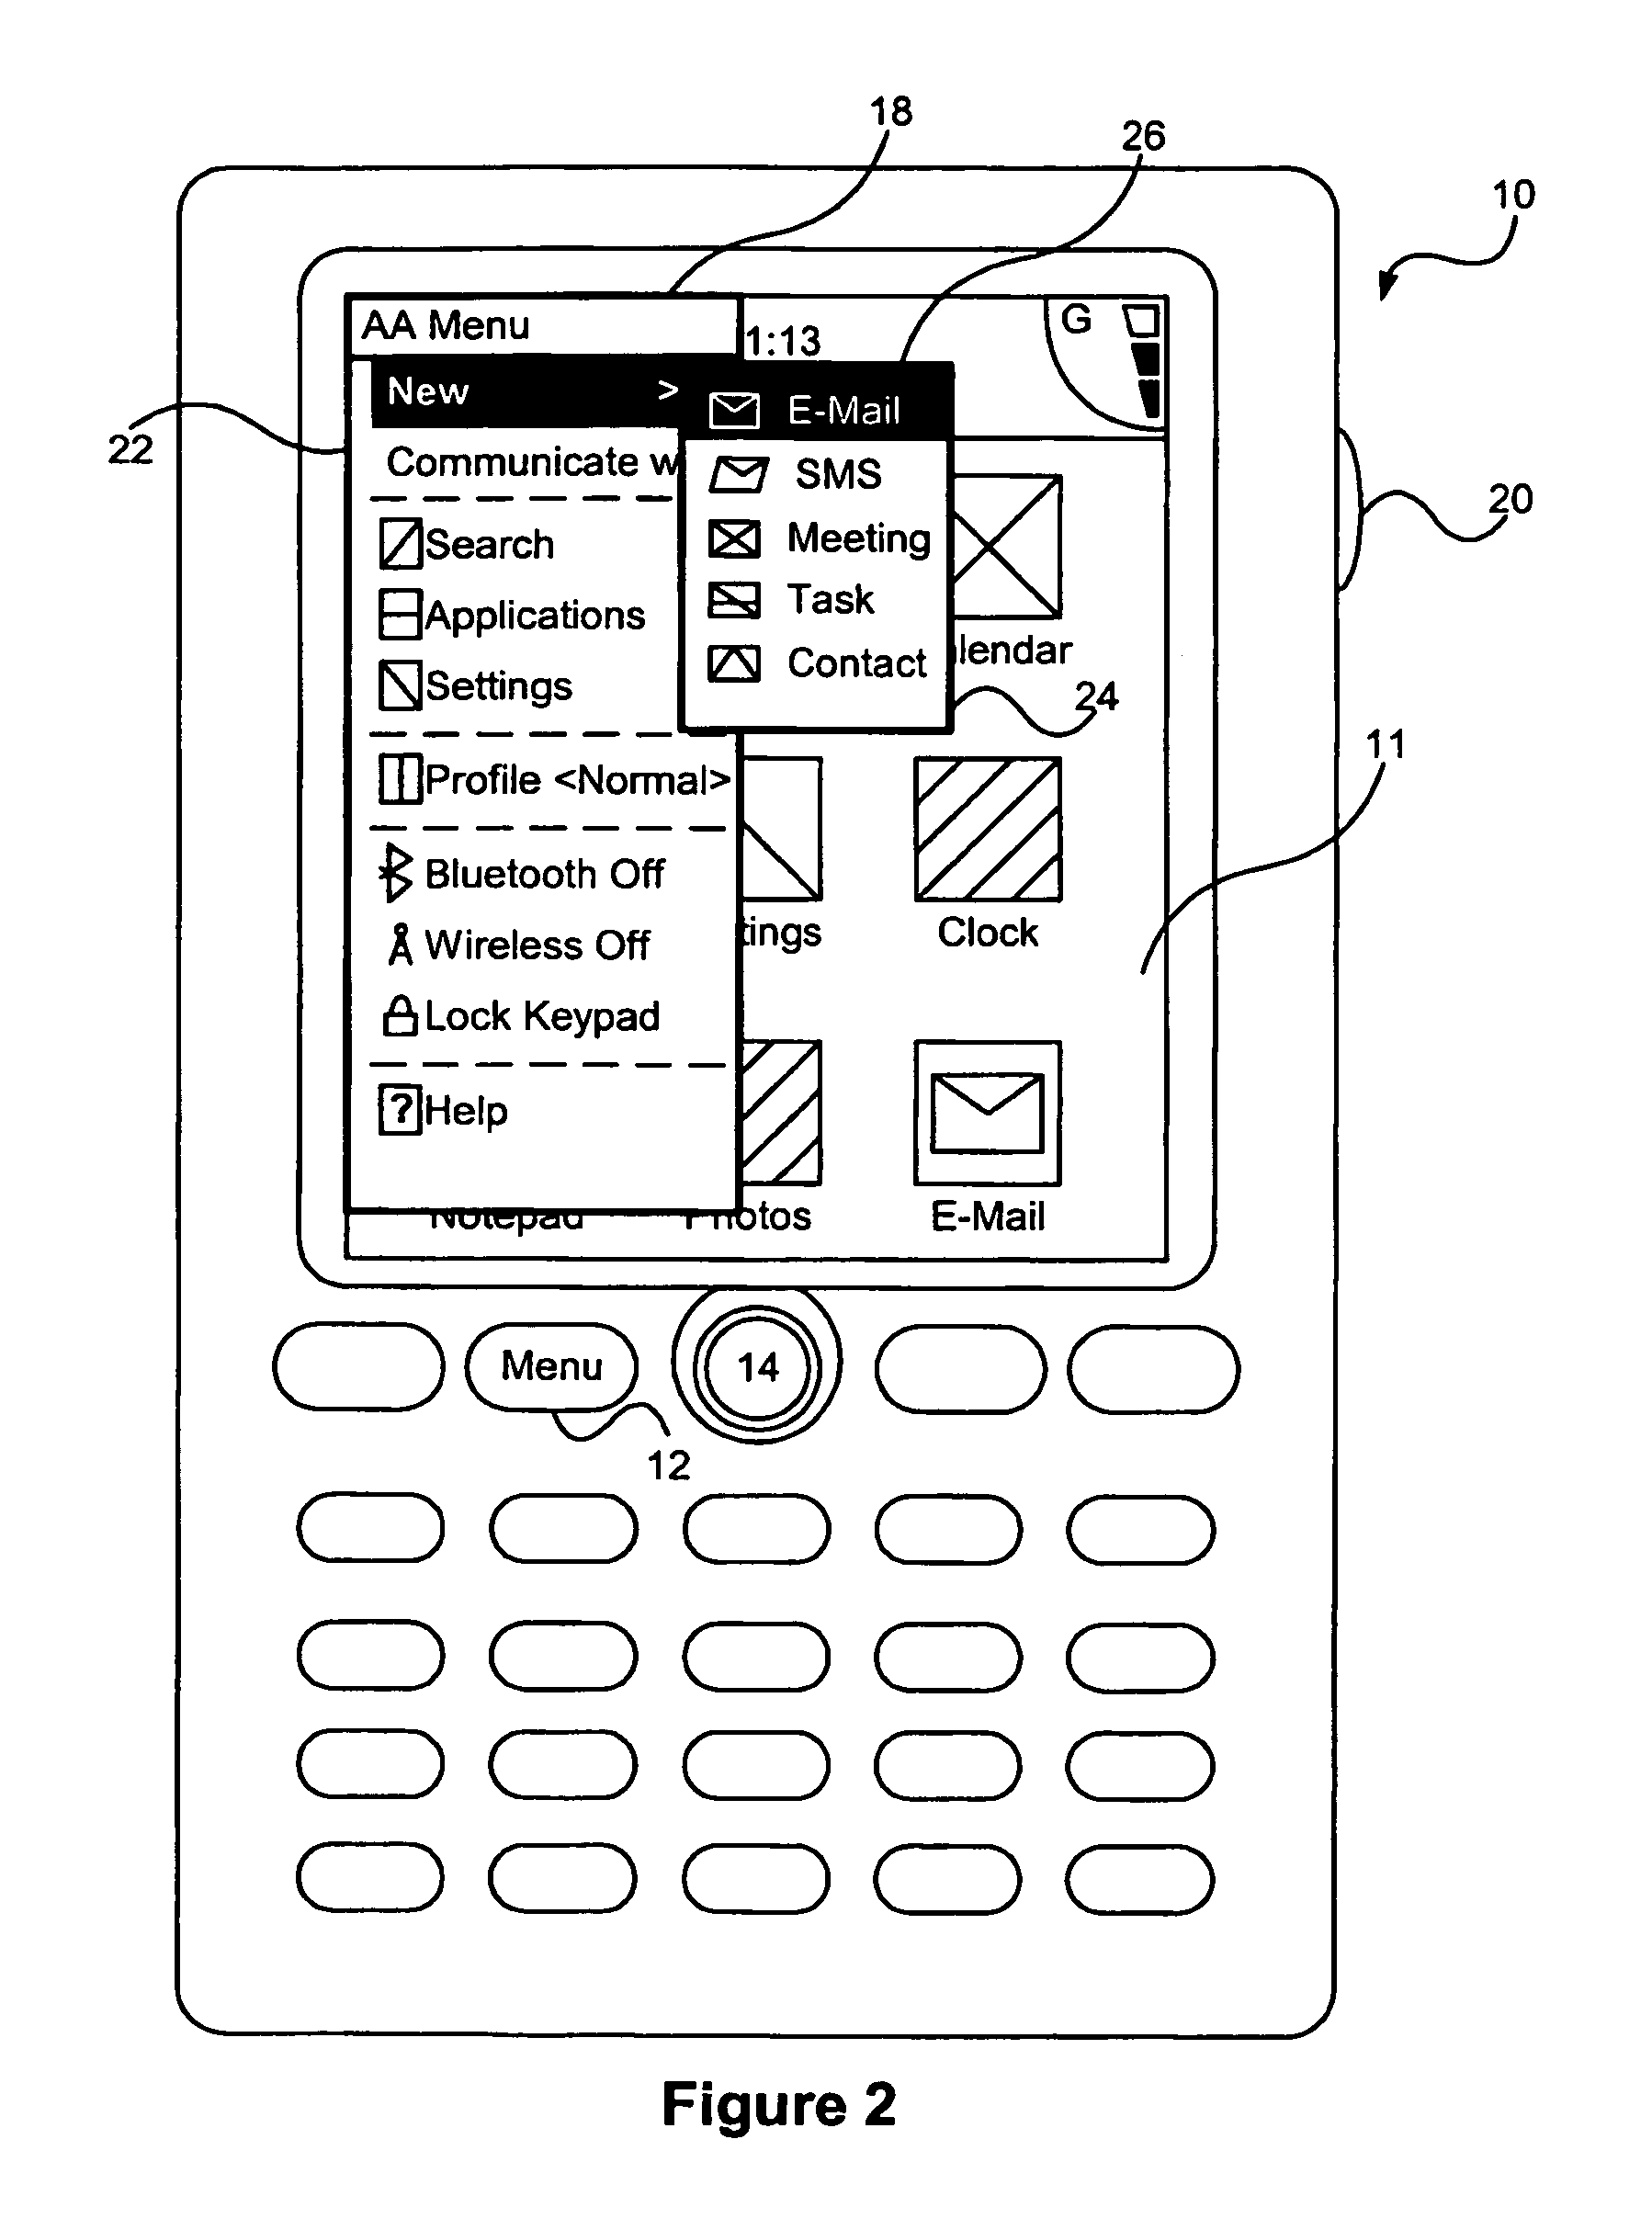 Primary actions menu for a mobile communication device